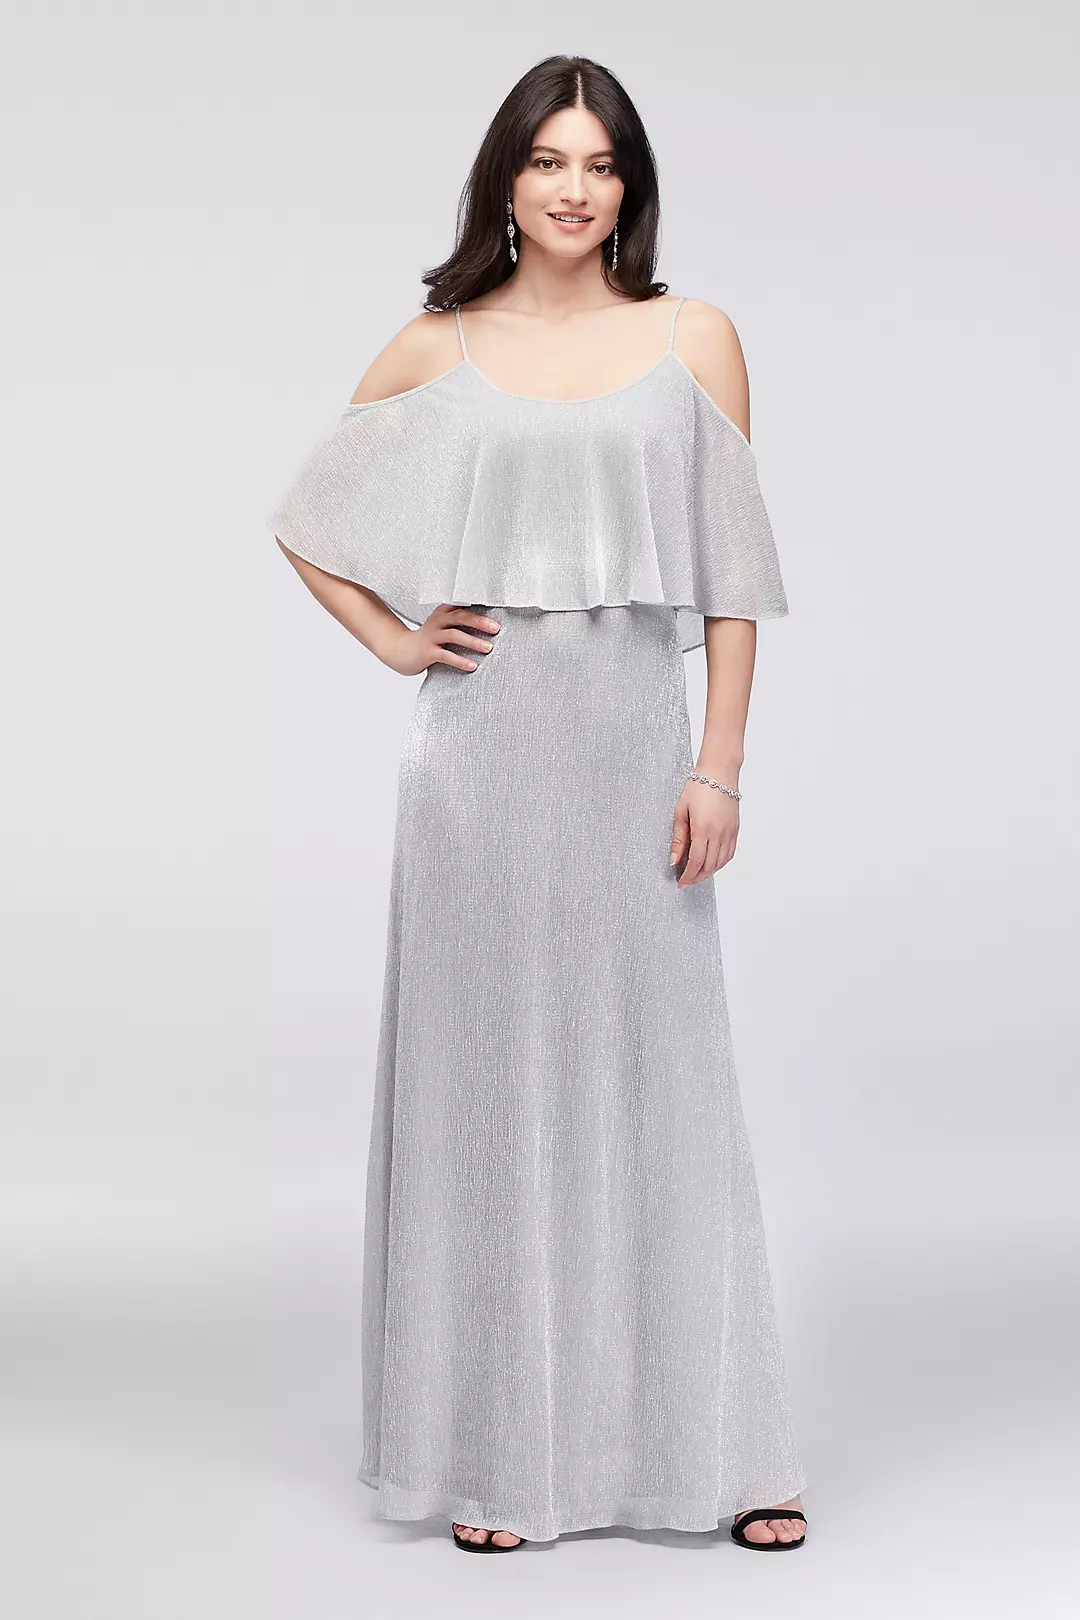 Sparkling Off-the-Shoulder Dress with Flounce Image